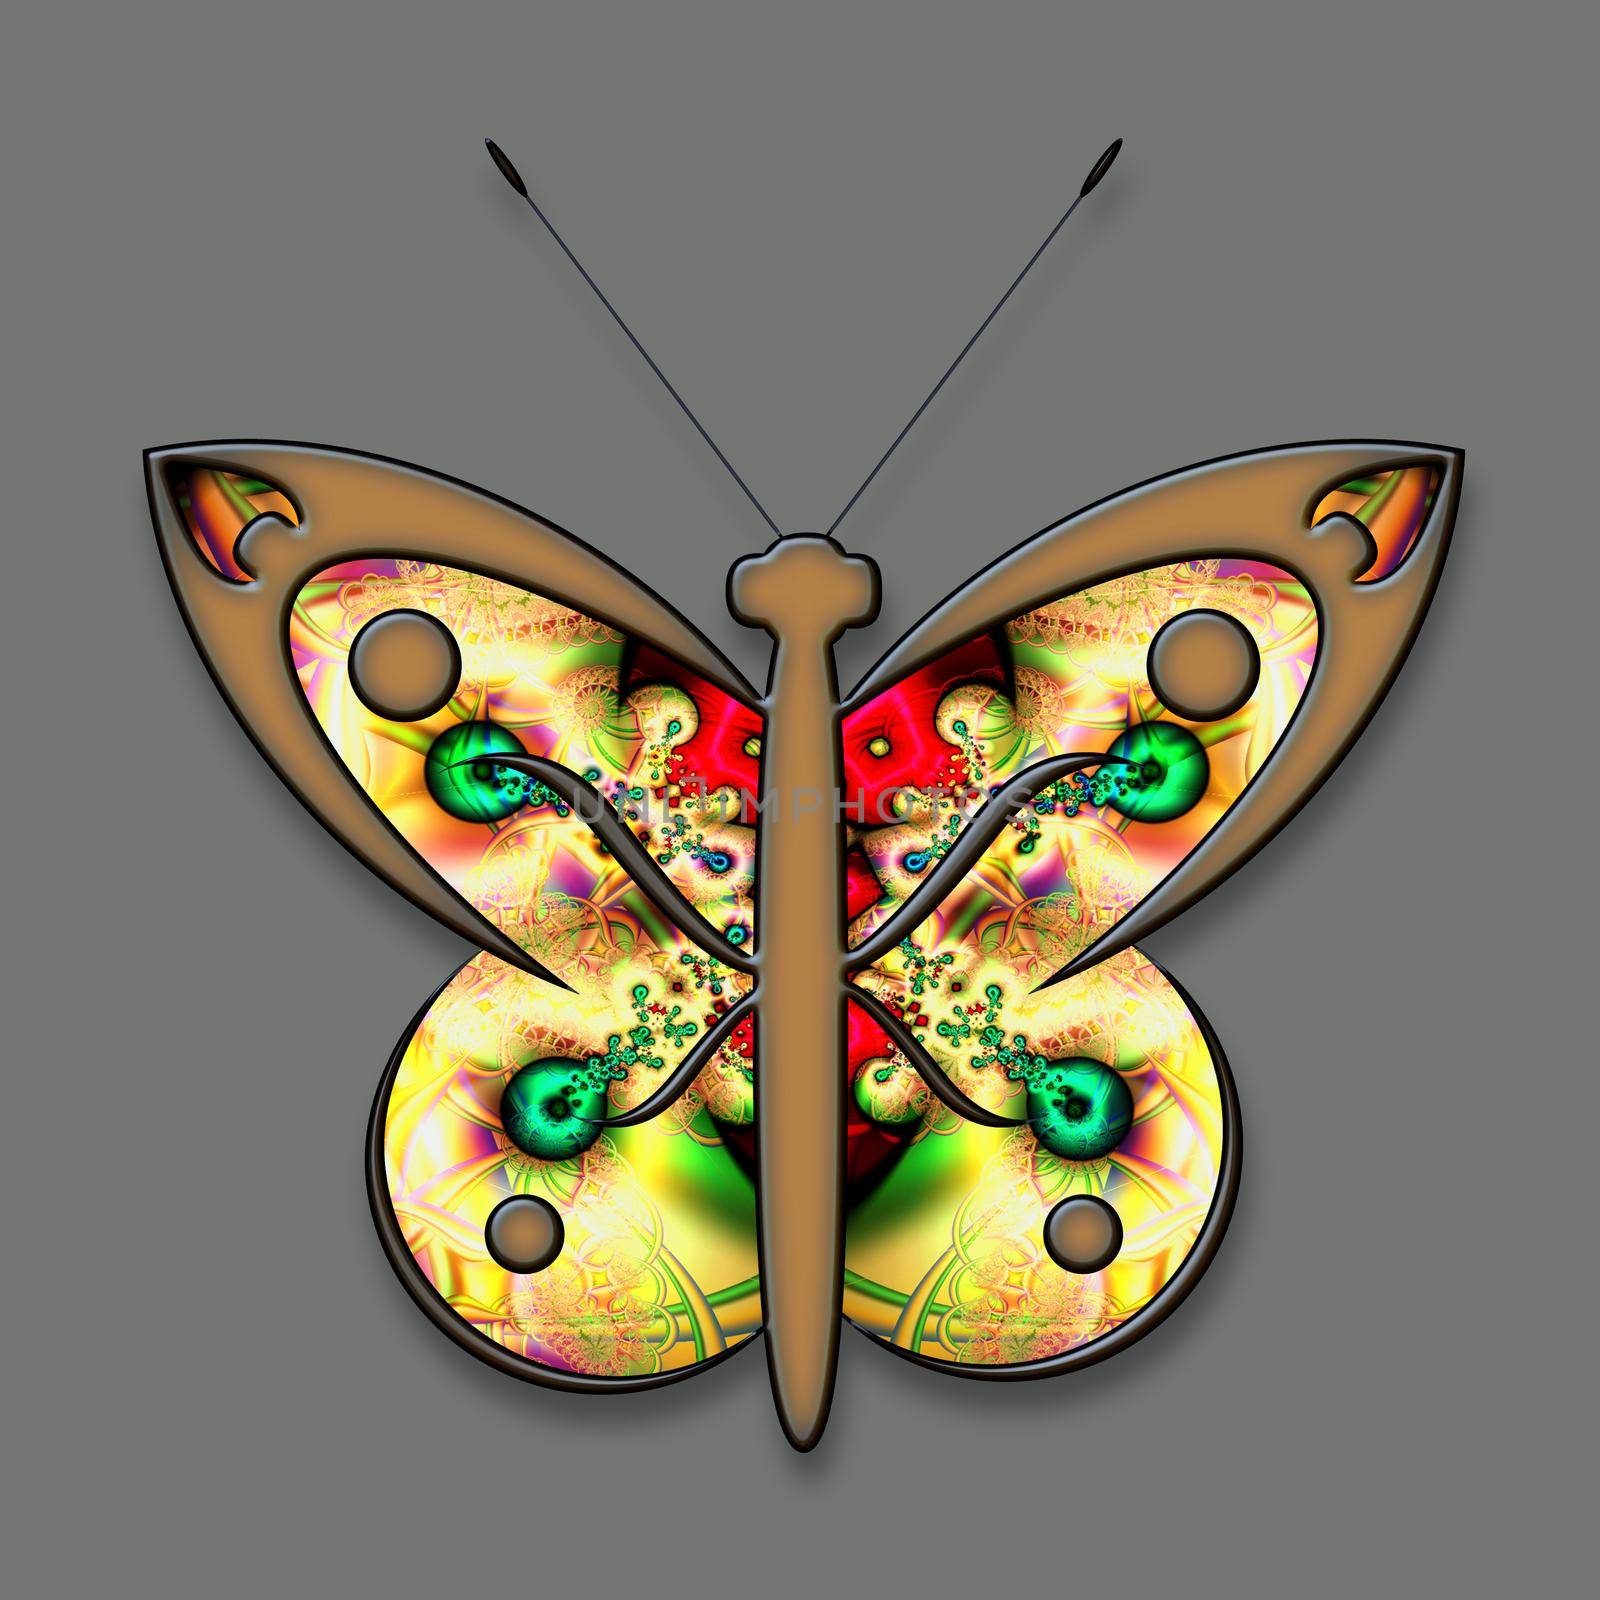 3D illustration of colorful butterfly by stocklady